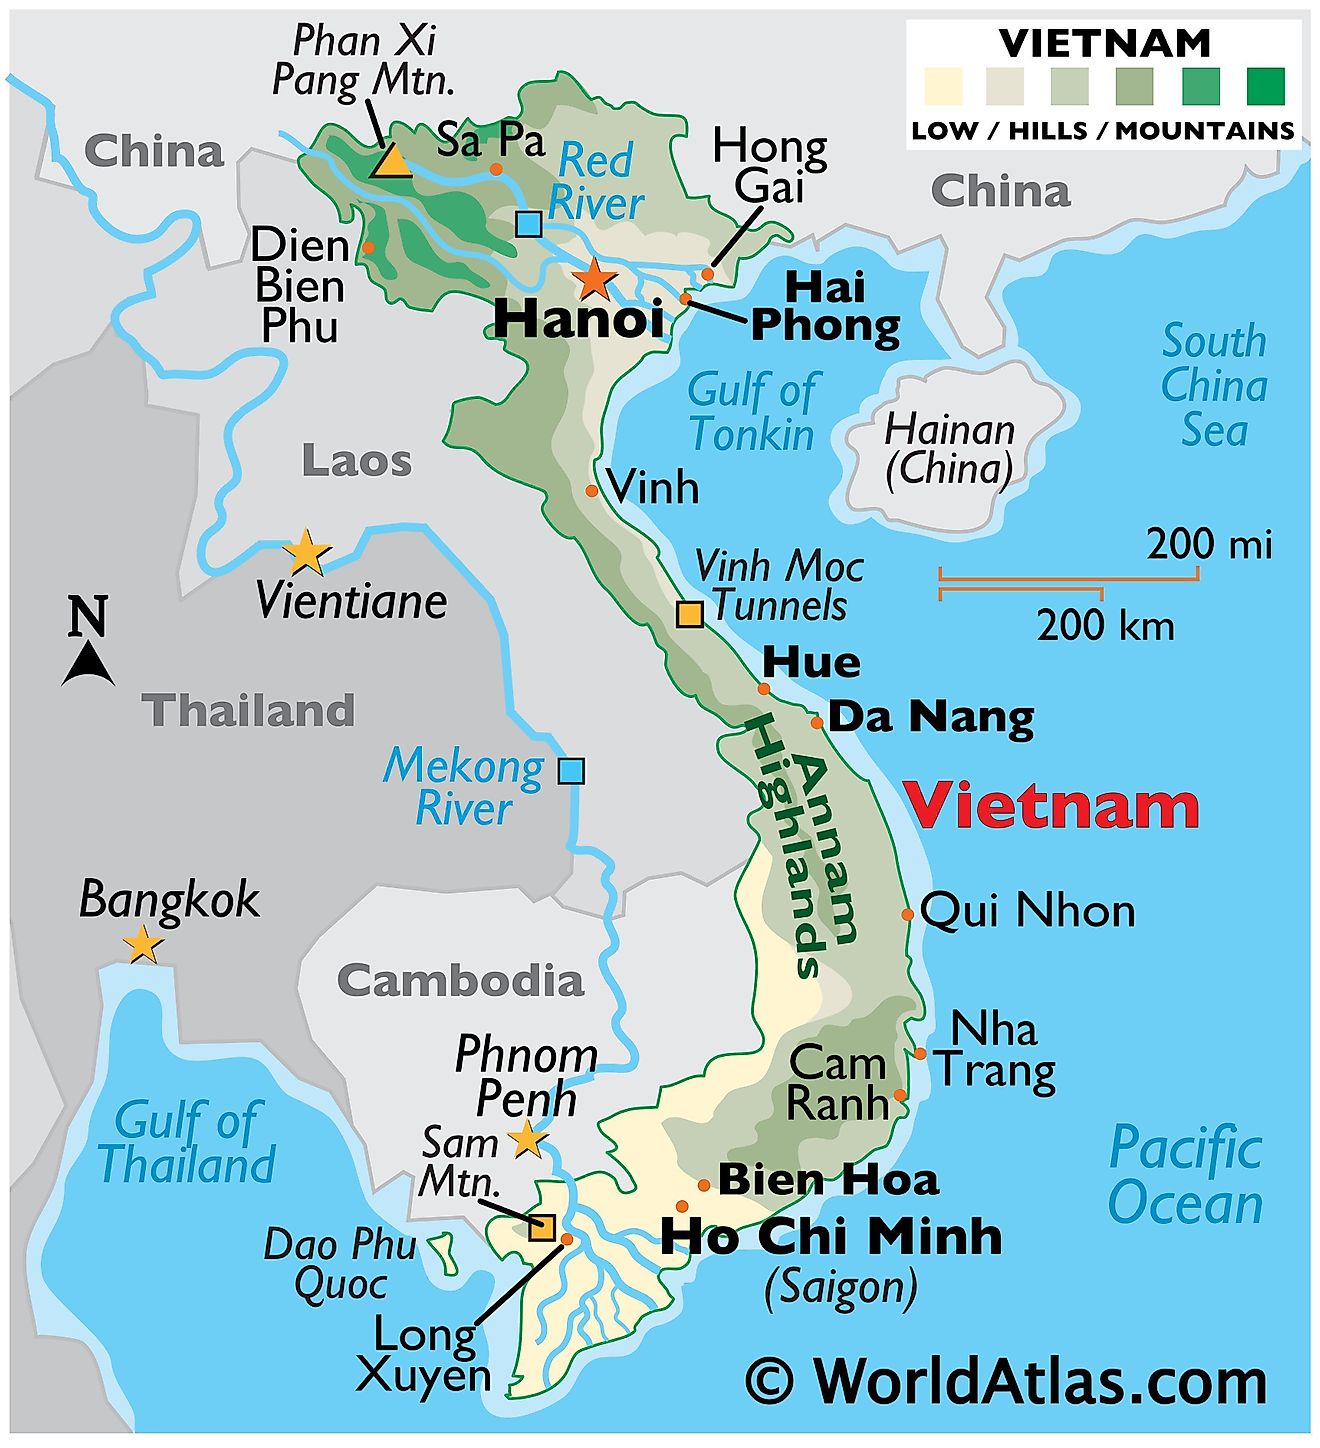 Physical Map of Vietnam with state boundaries, major rivers, highland areas, highest peak, important cities, and more.